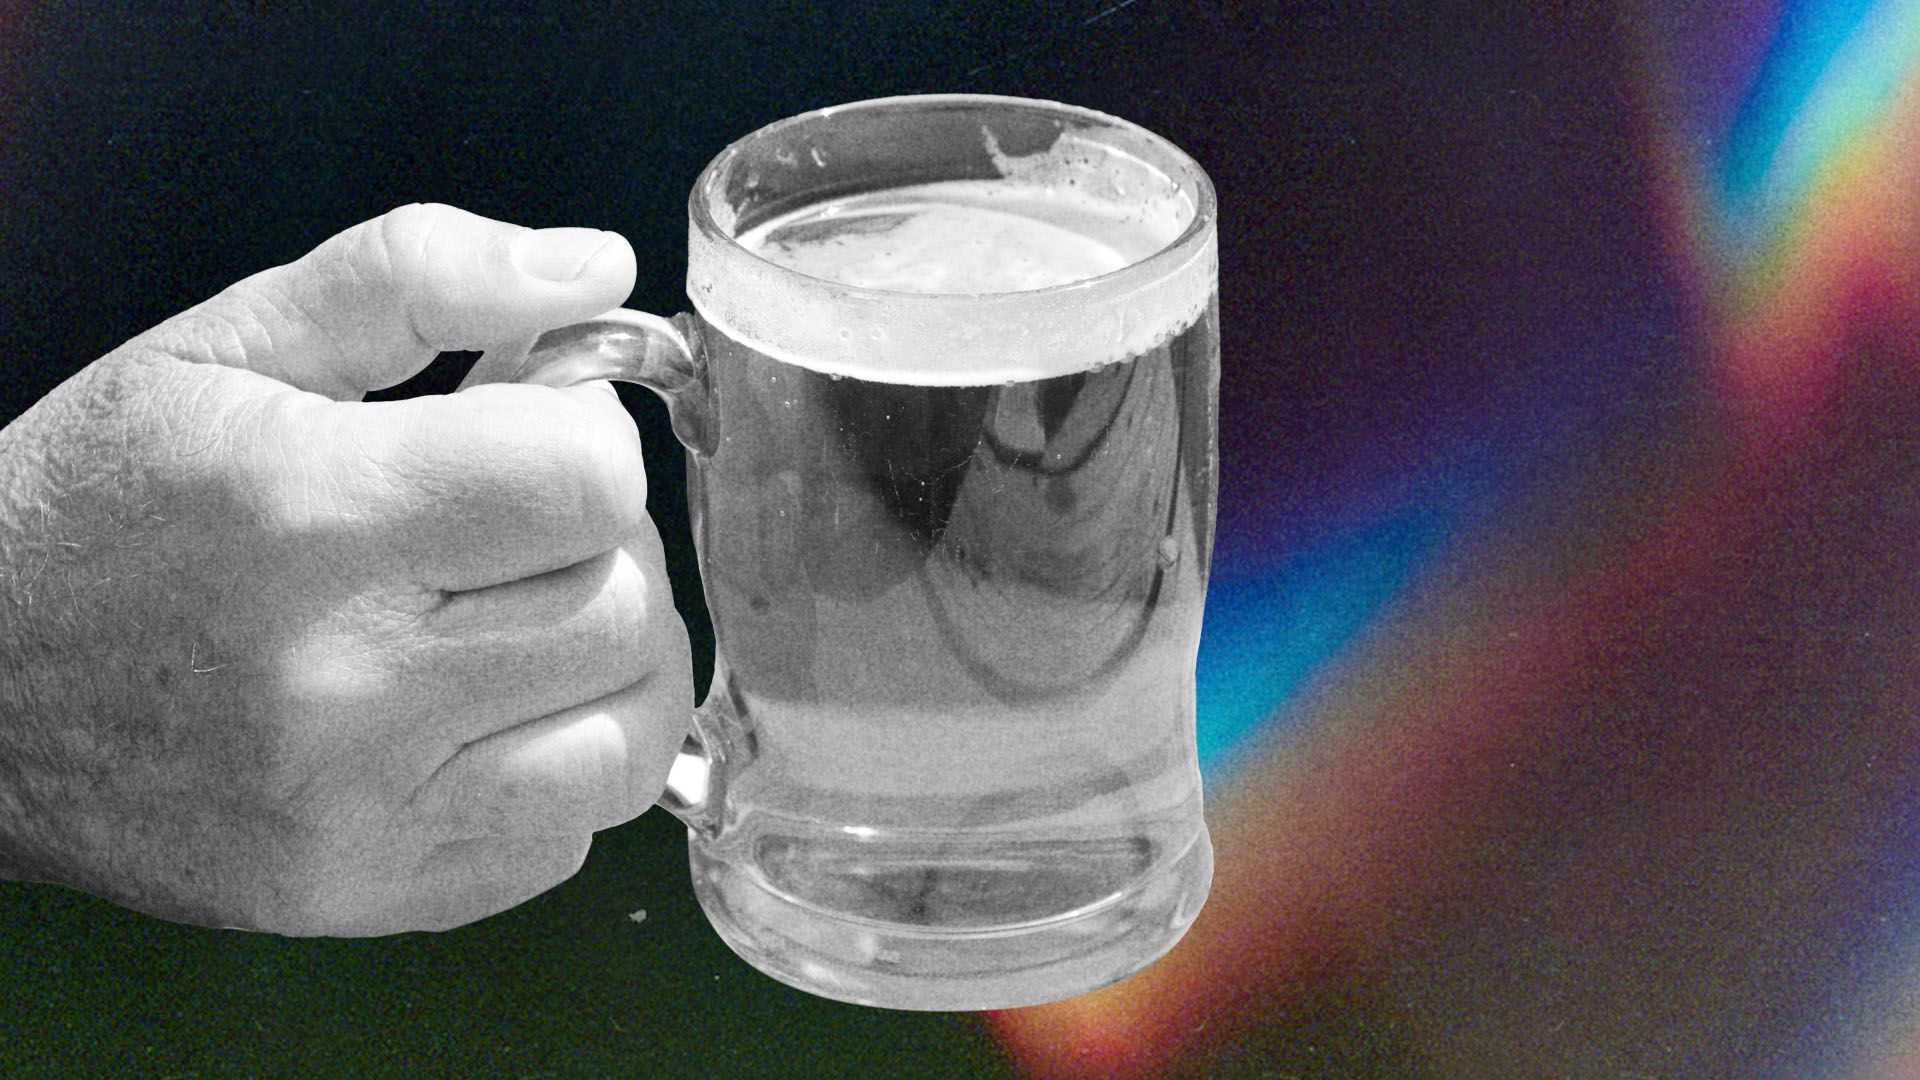 A close-up photo of a hand holding a beer.